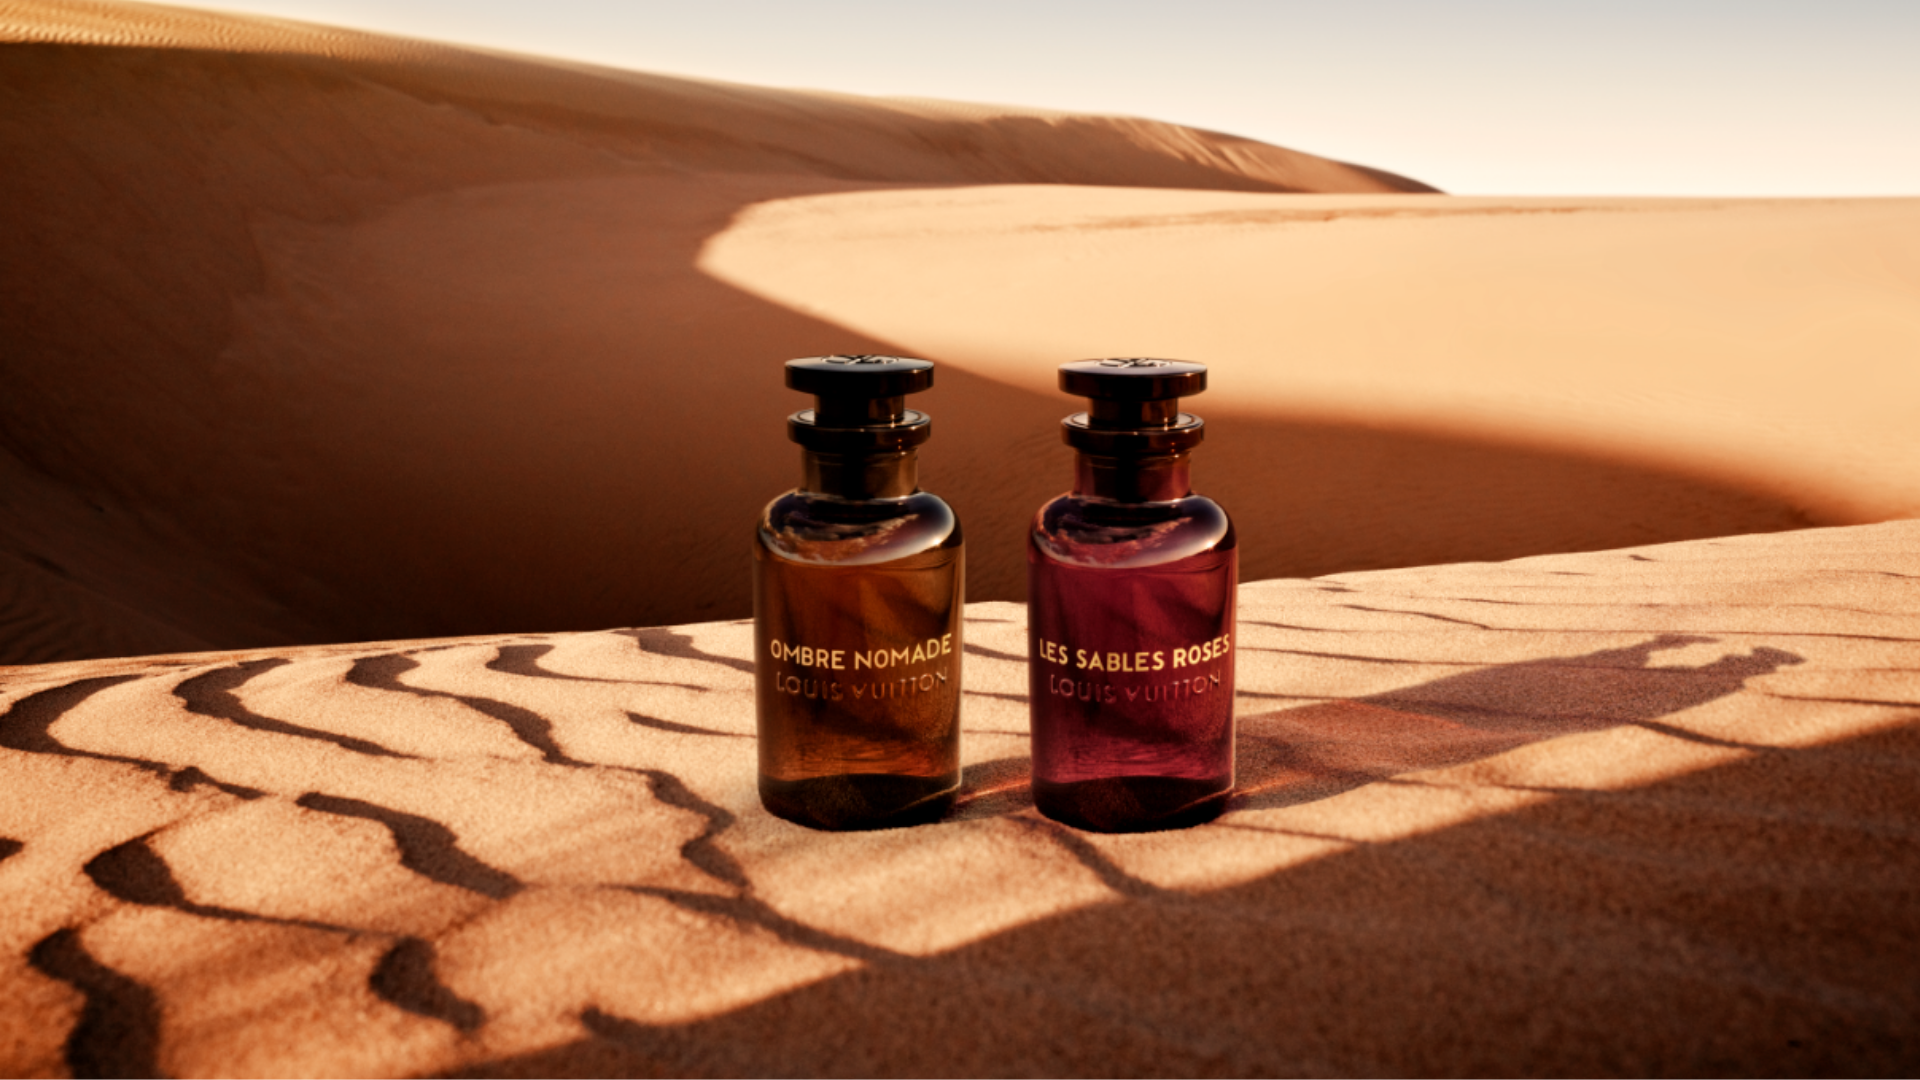 Louis Vuitton takes inspiration from the Middle East for new fragrance,  Fleur du Désert - Duty Free Hunter